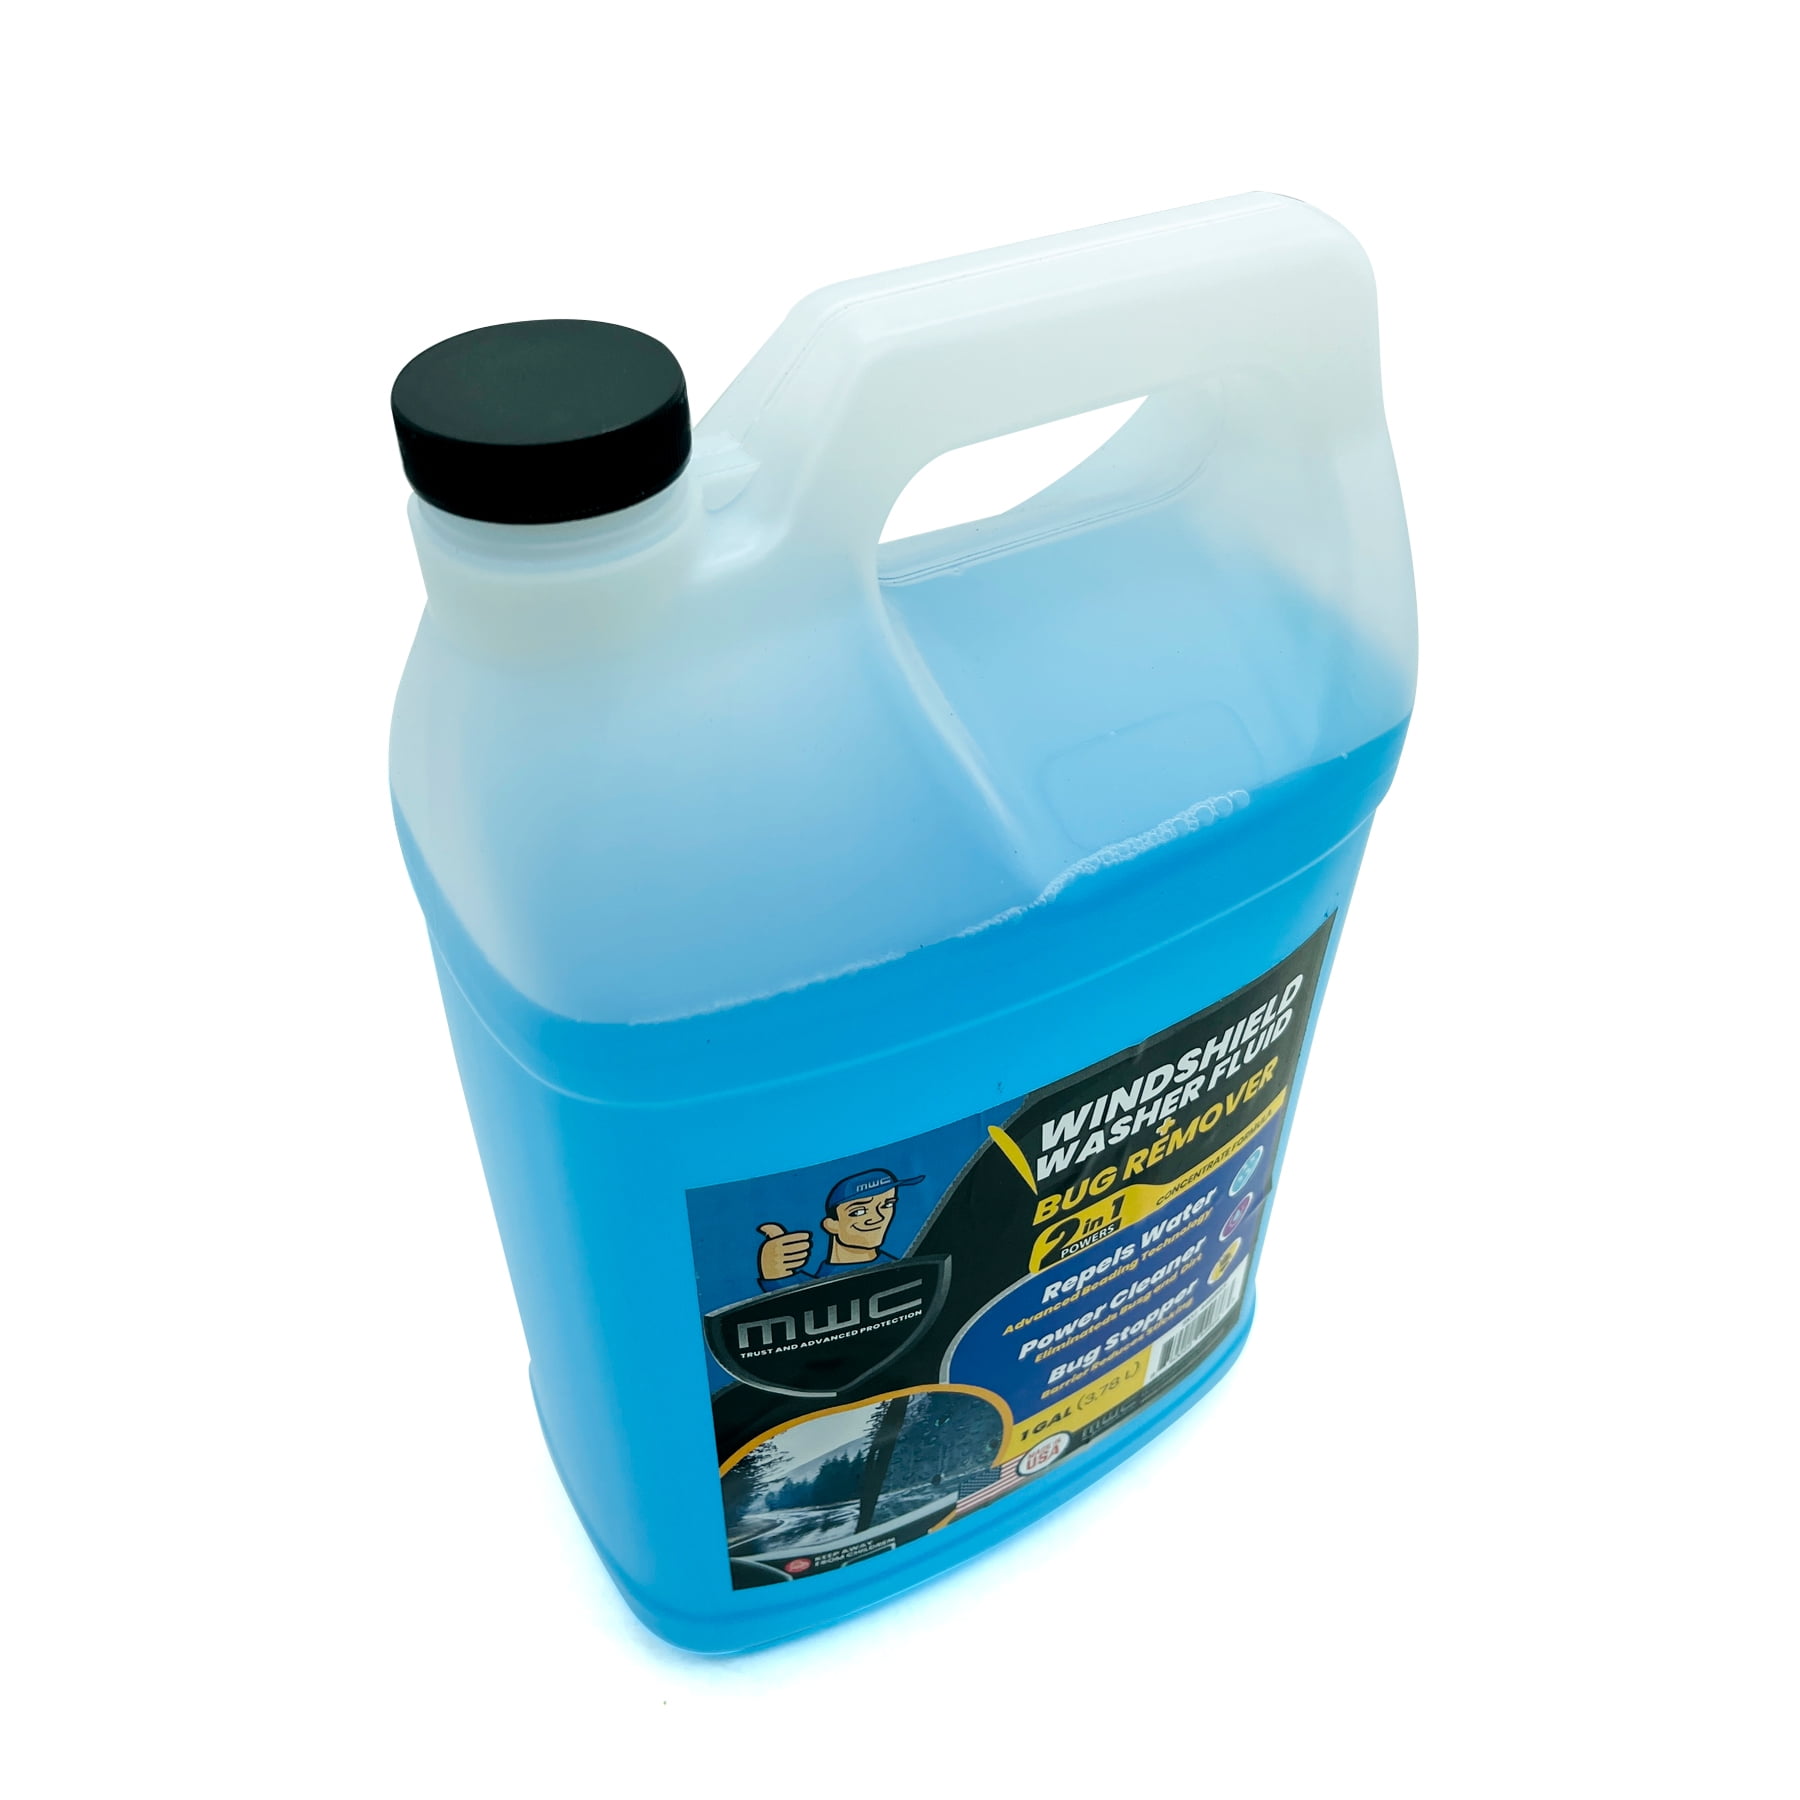 Windshield-Washer Concentrate - MOC Products Company Inc